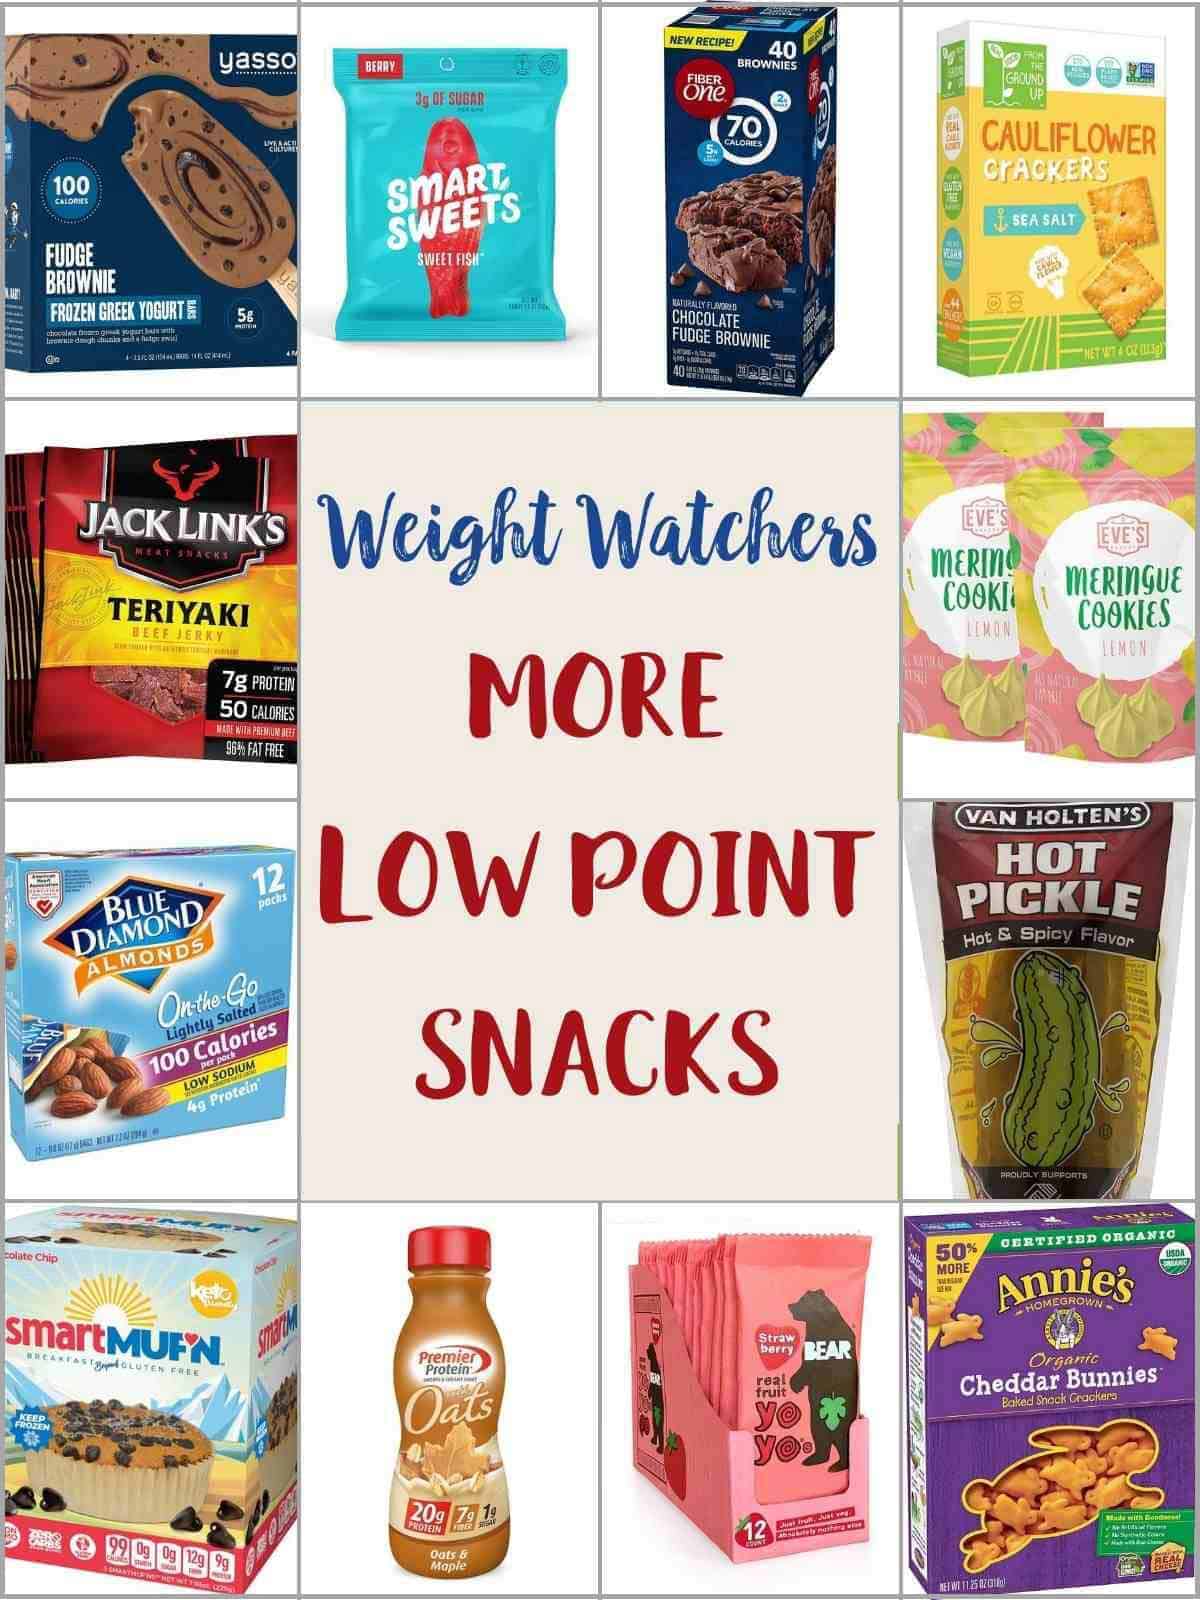 More Low Point Snacks | Weight Watchers